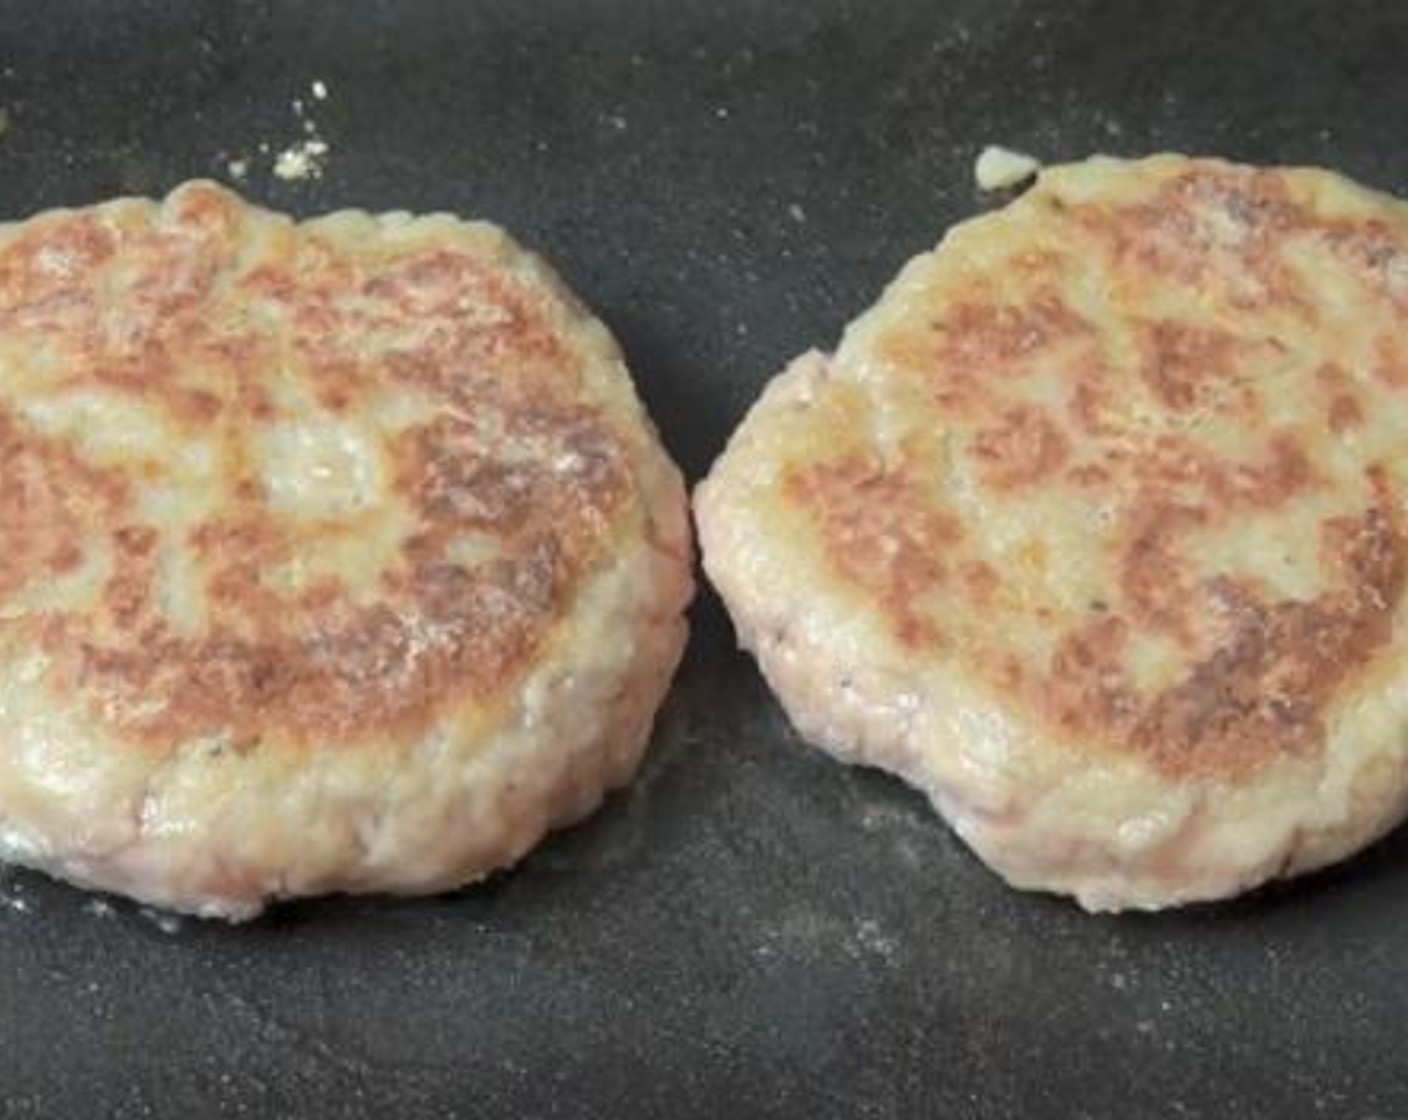 step 2 Divide the mixture into four portions, and form each portion into a patty. Dust each patty with some flour, and transfer it to a greased baking tray. Cook inside an electric skillet under medium heat for about 3 minutes on each side.